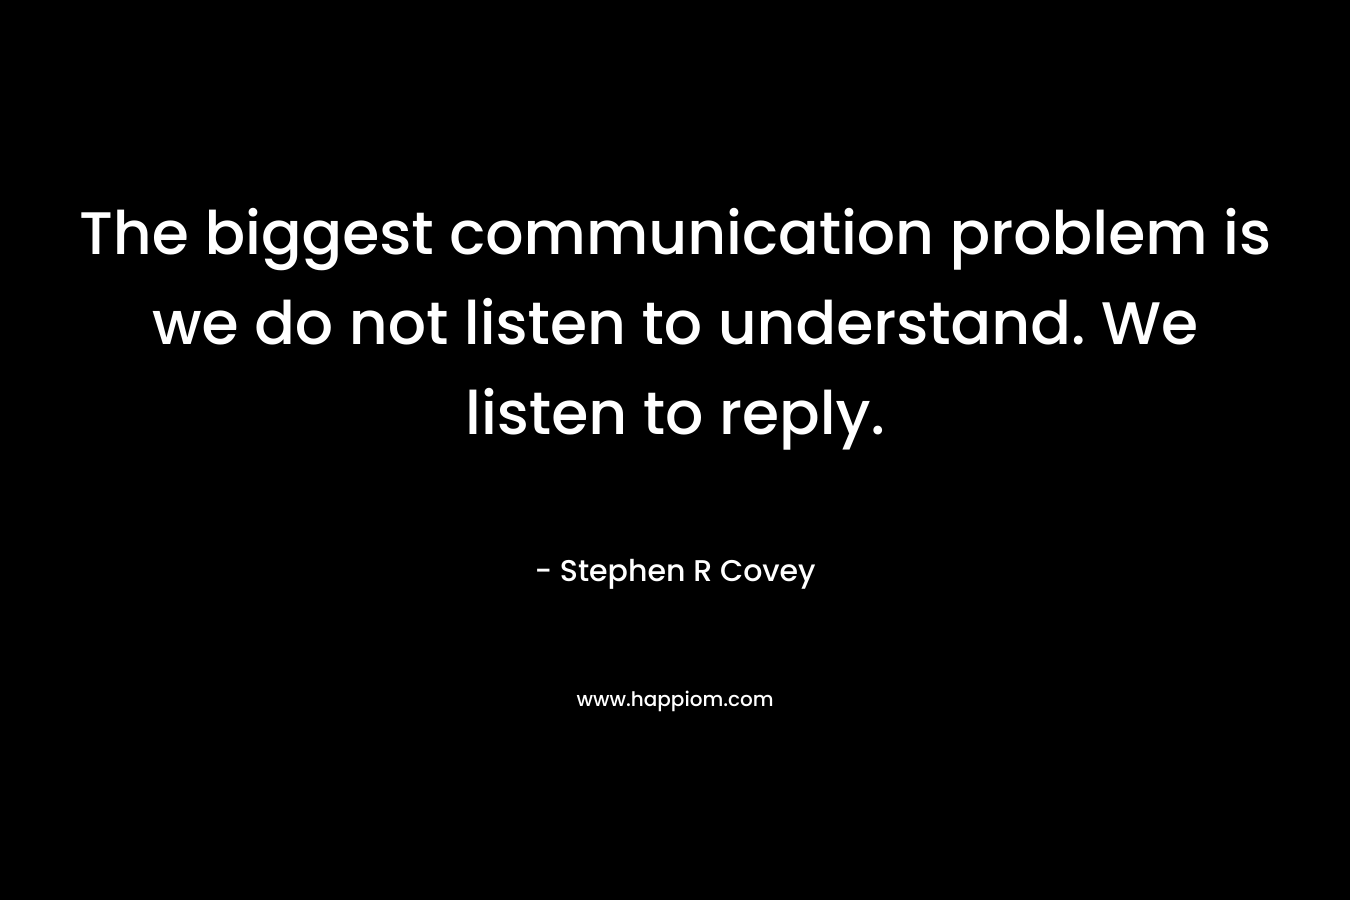 The biggest communication problem is we do not listen to understand. We listen to reply. – Stephen R Covey